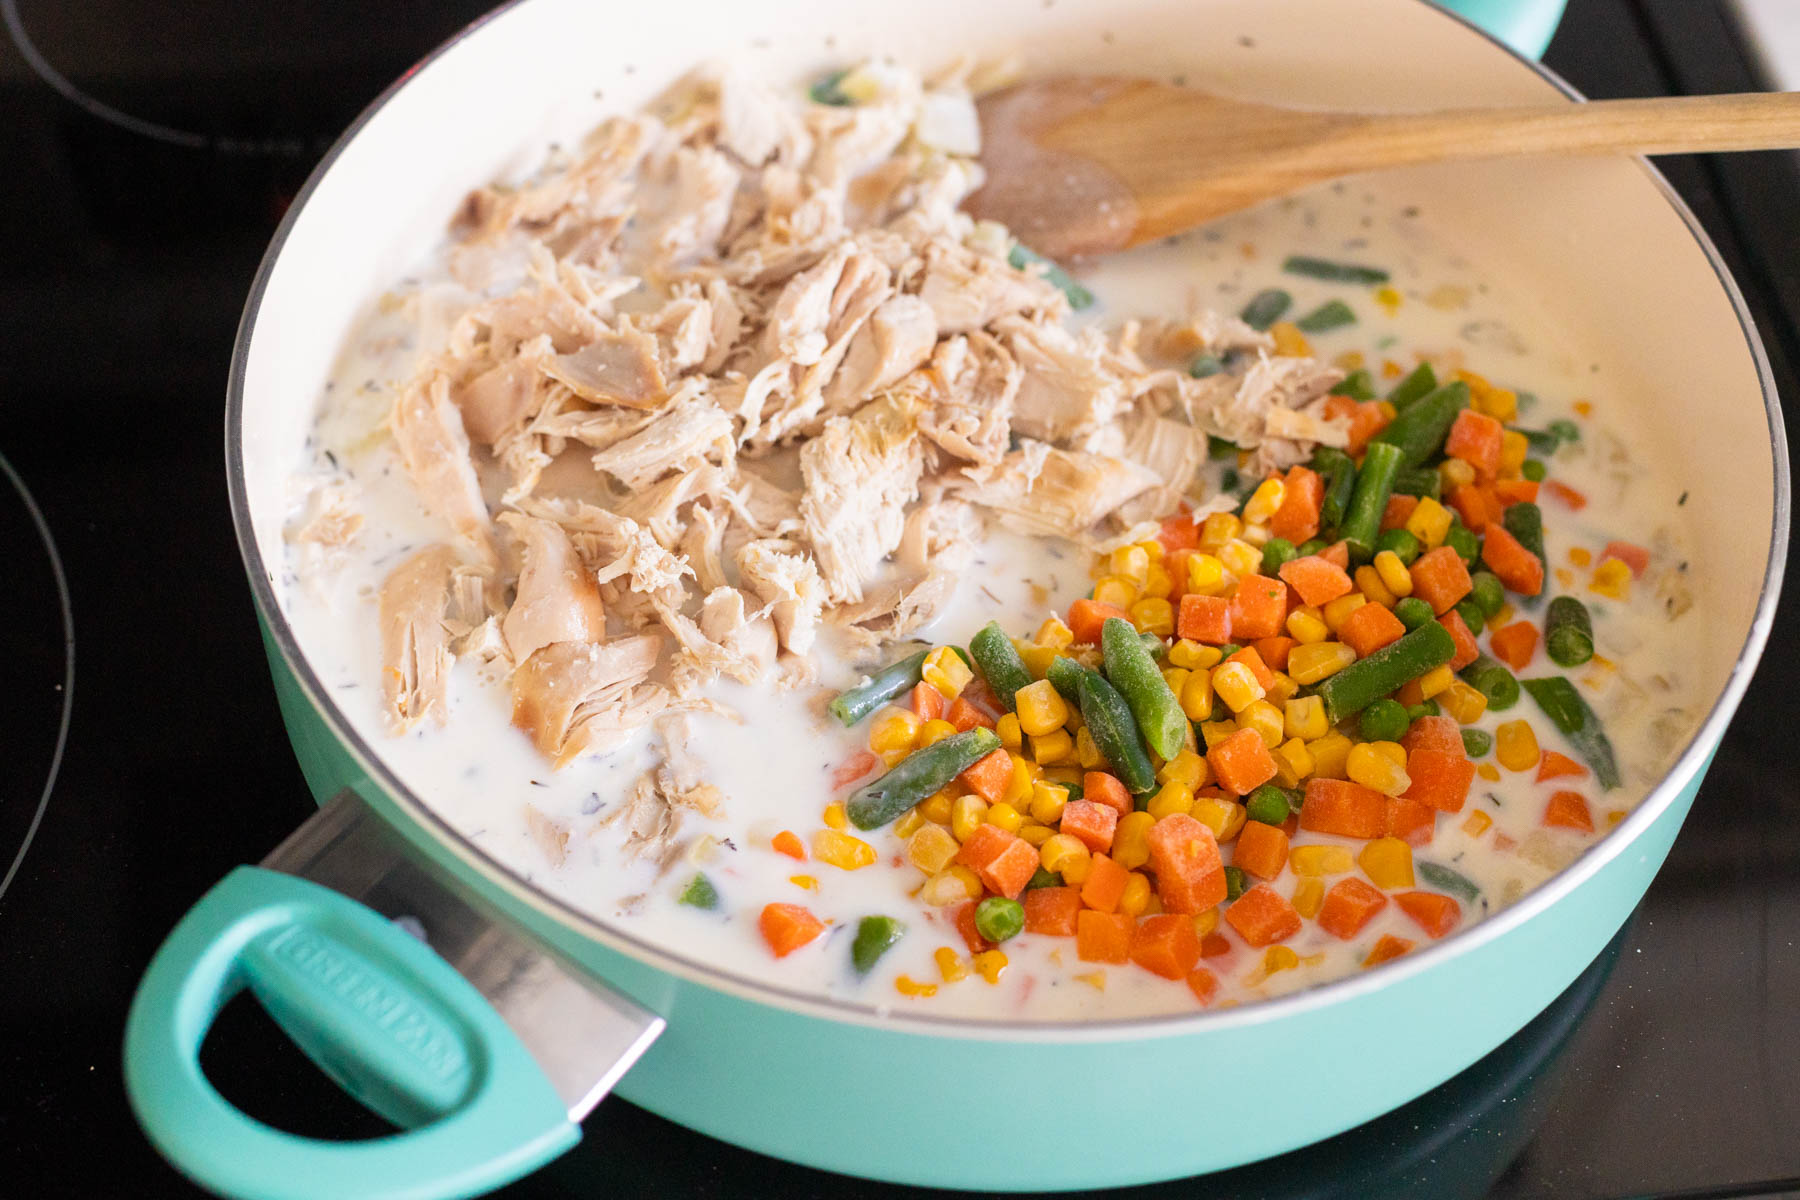 The shredded chicken and frozen vegetables are added to the skillet.